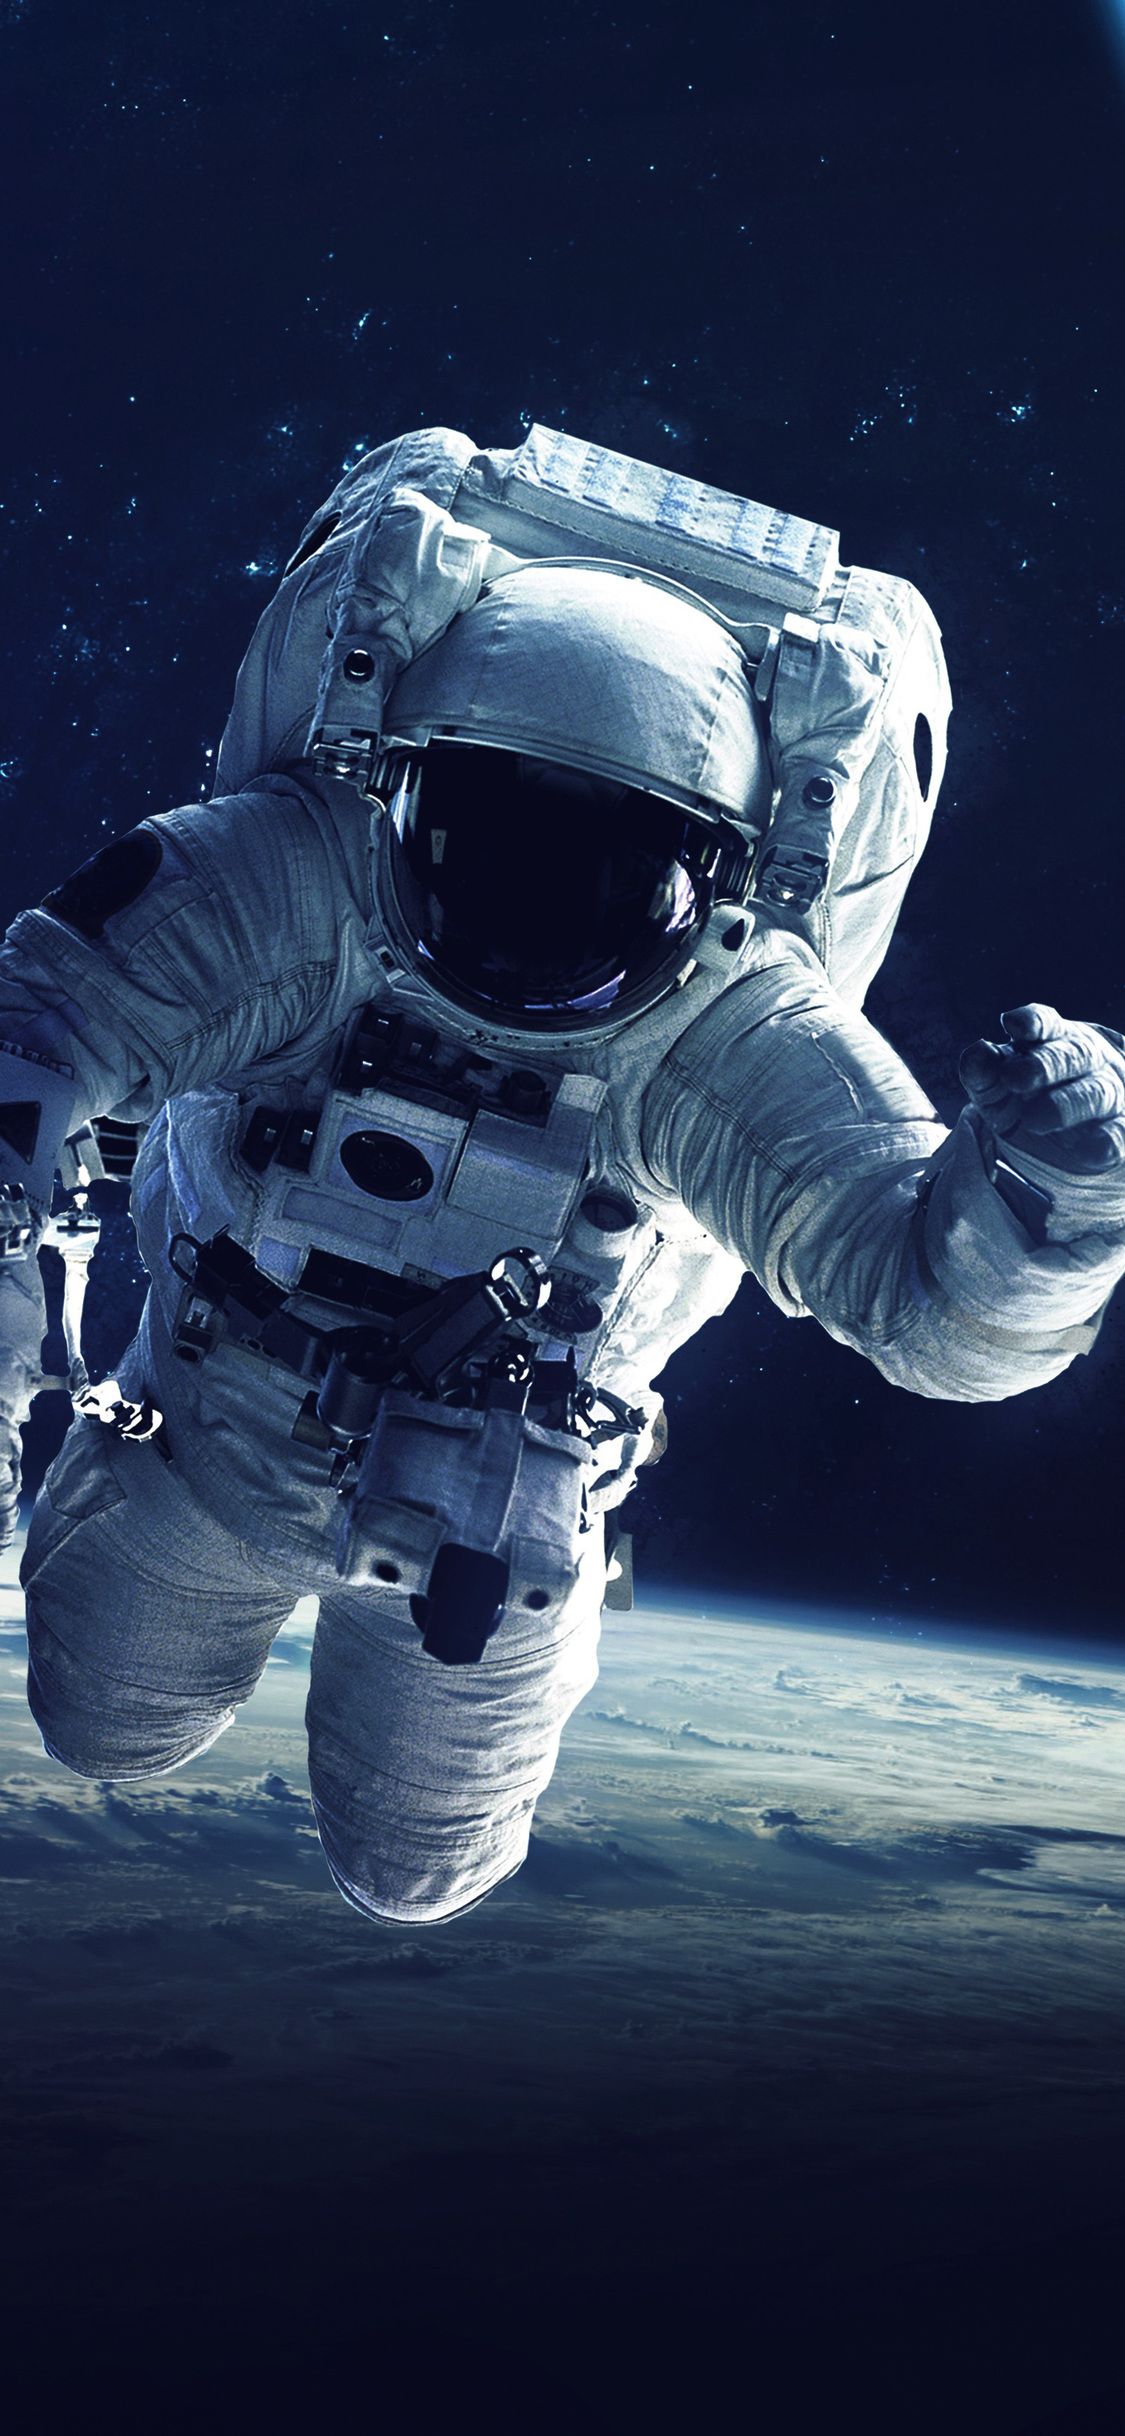 X astronaut k iphone xsiphone iphone x hd k wallpapers images backgrounds photos and picâ astronaut wallpaper space artwork astronauts in space